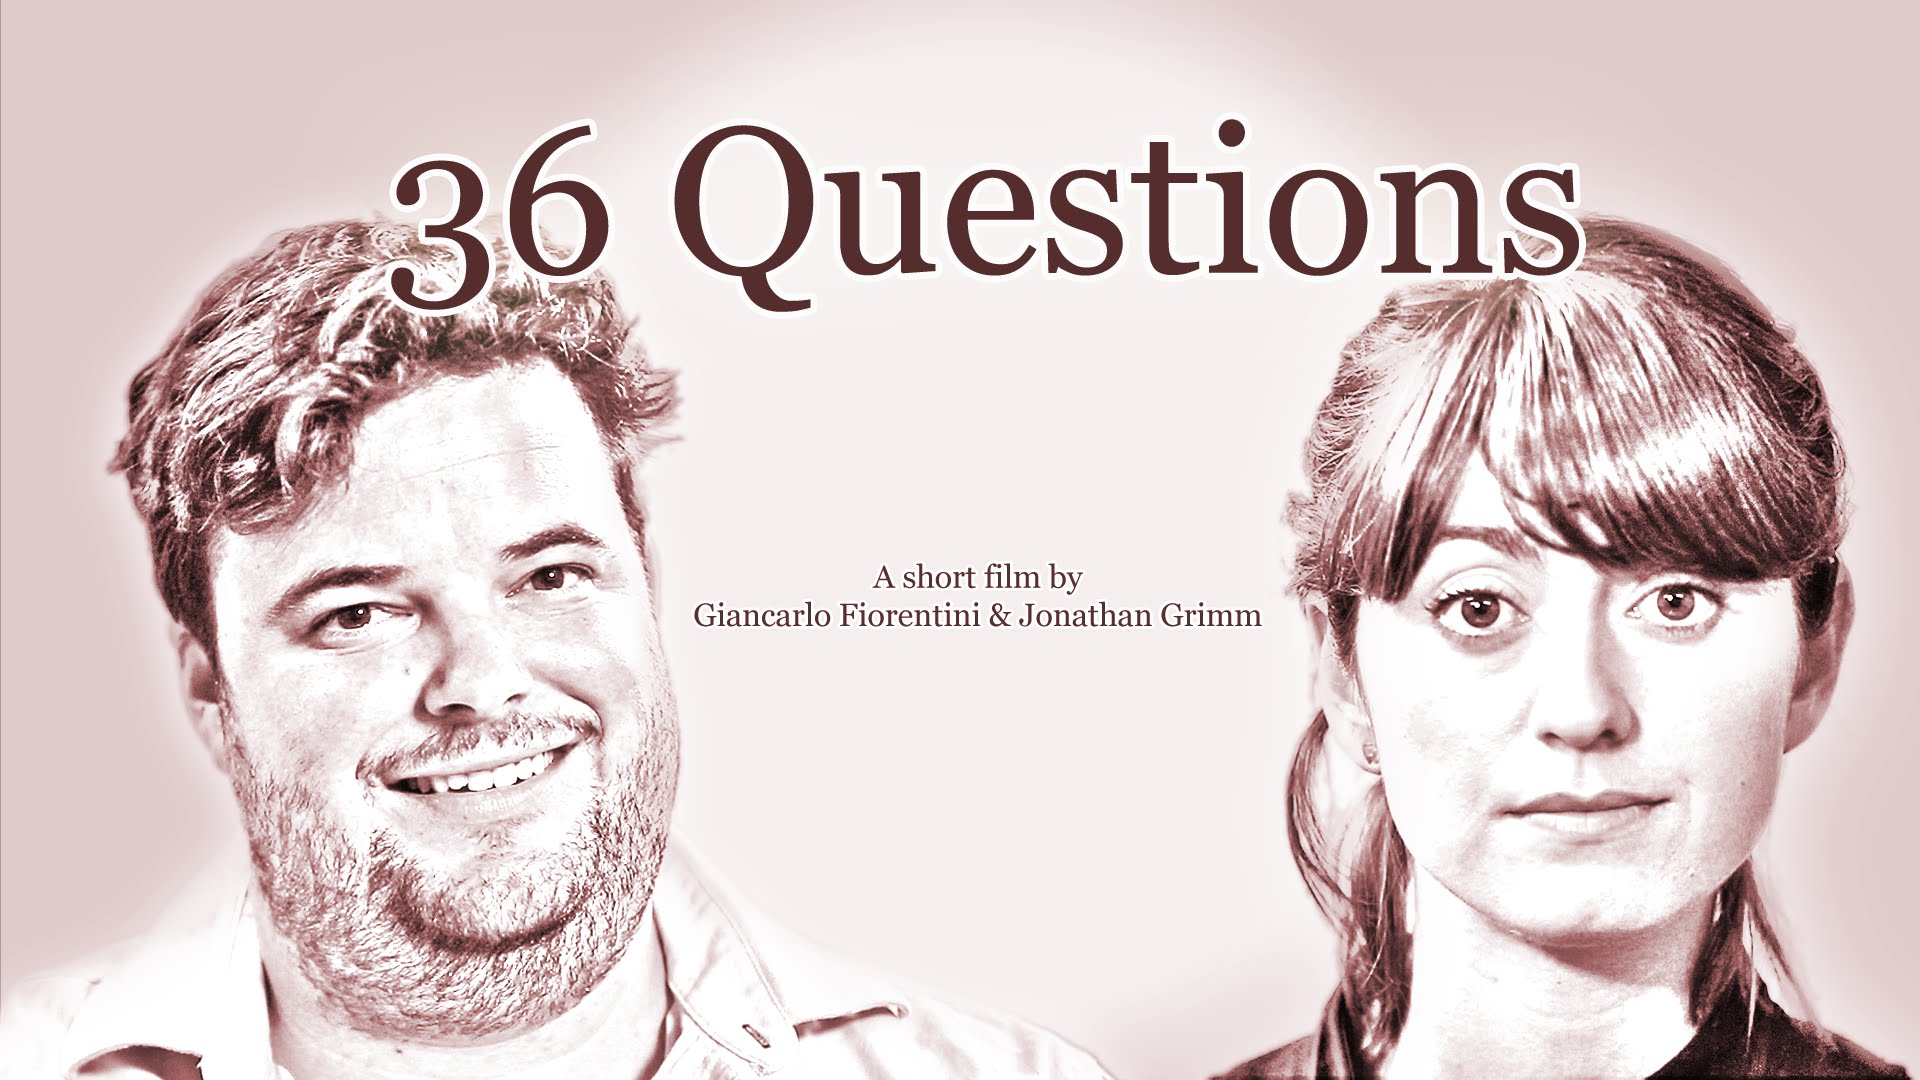 Poster for the short film 36 Questions